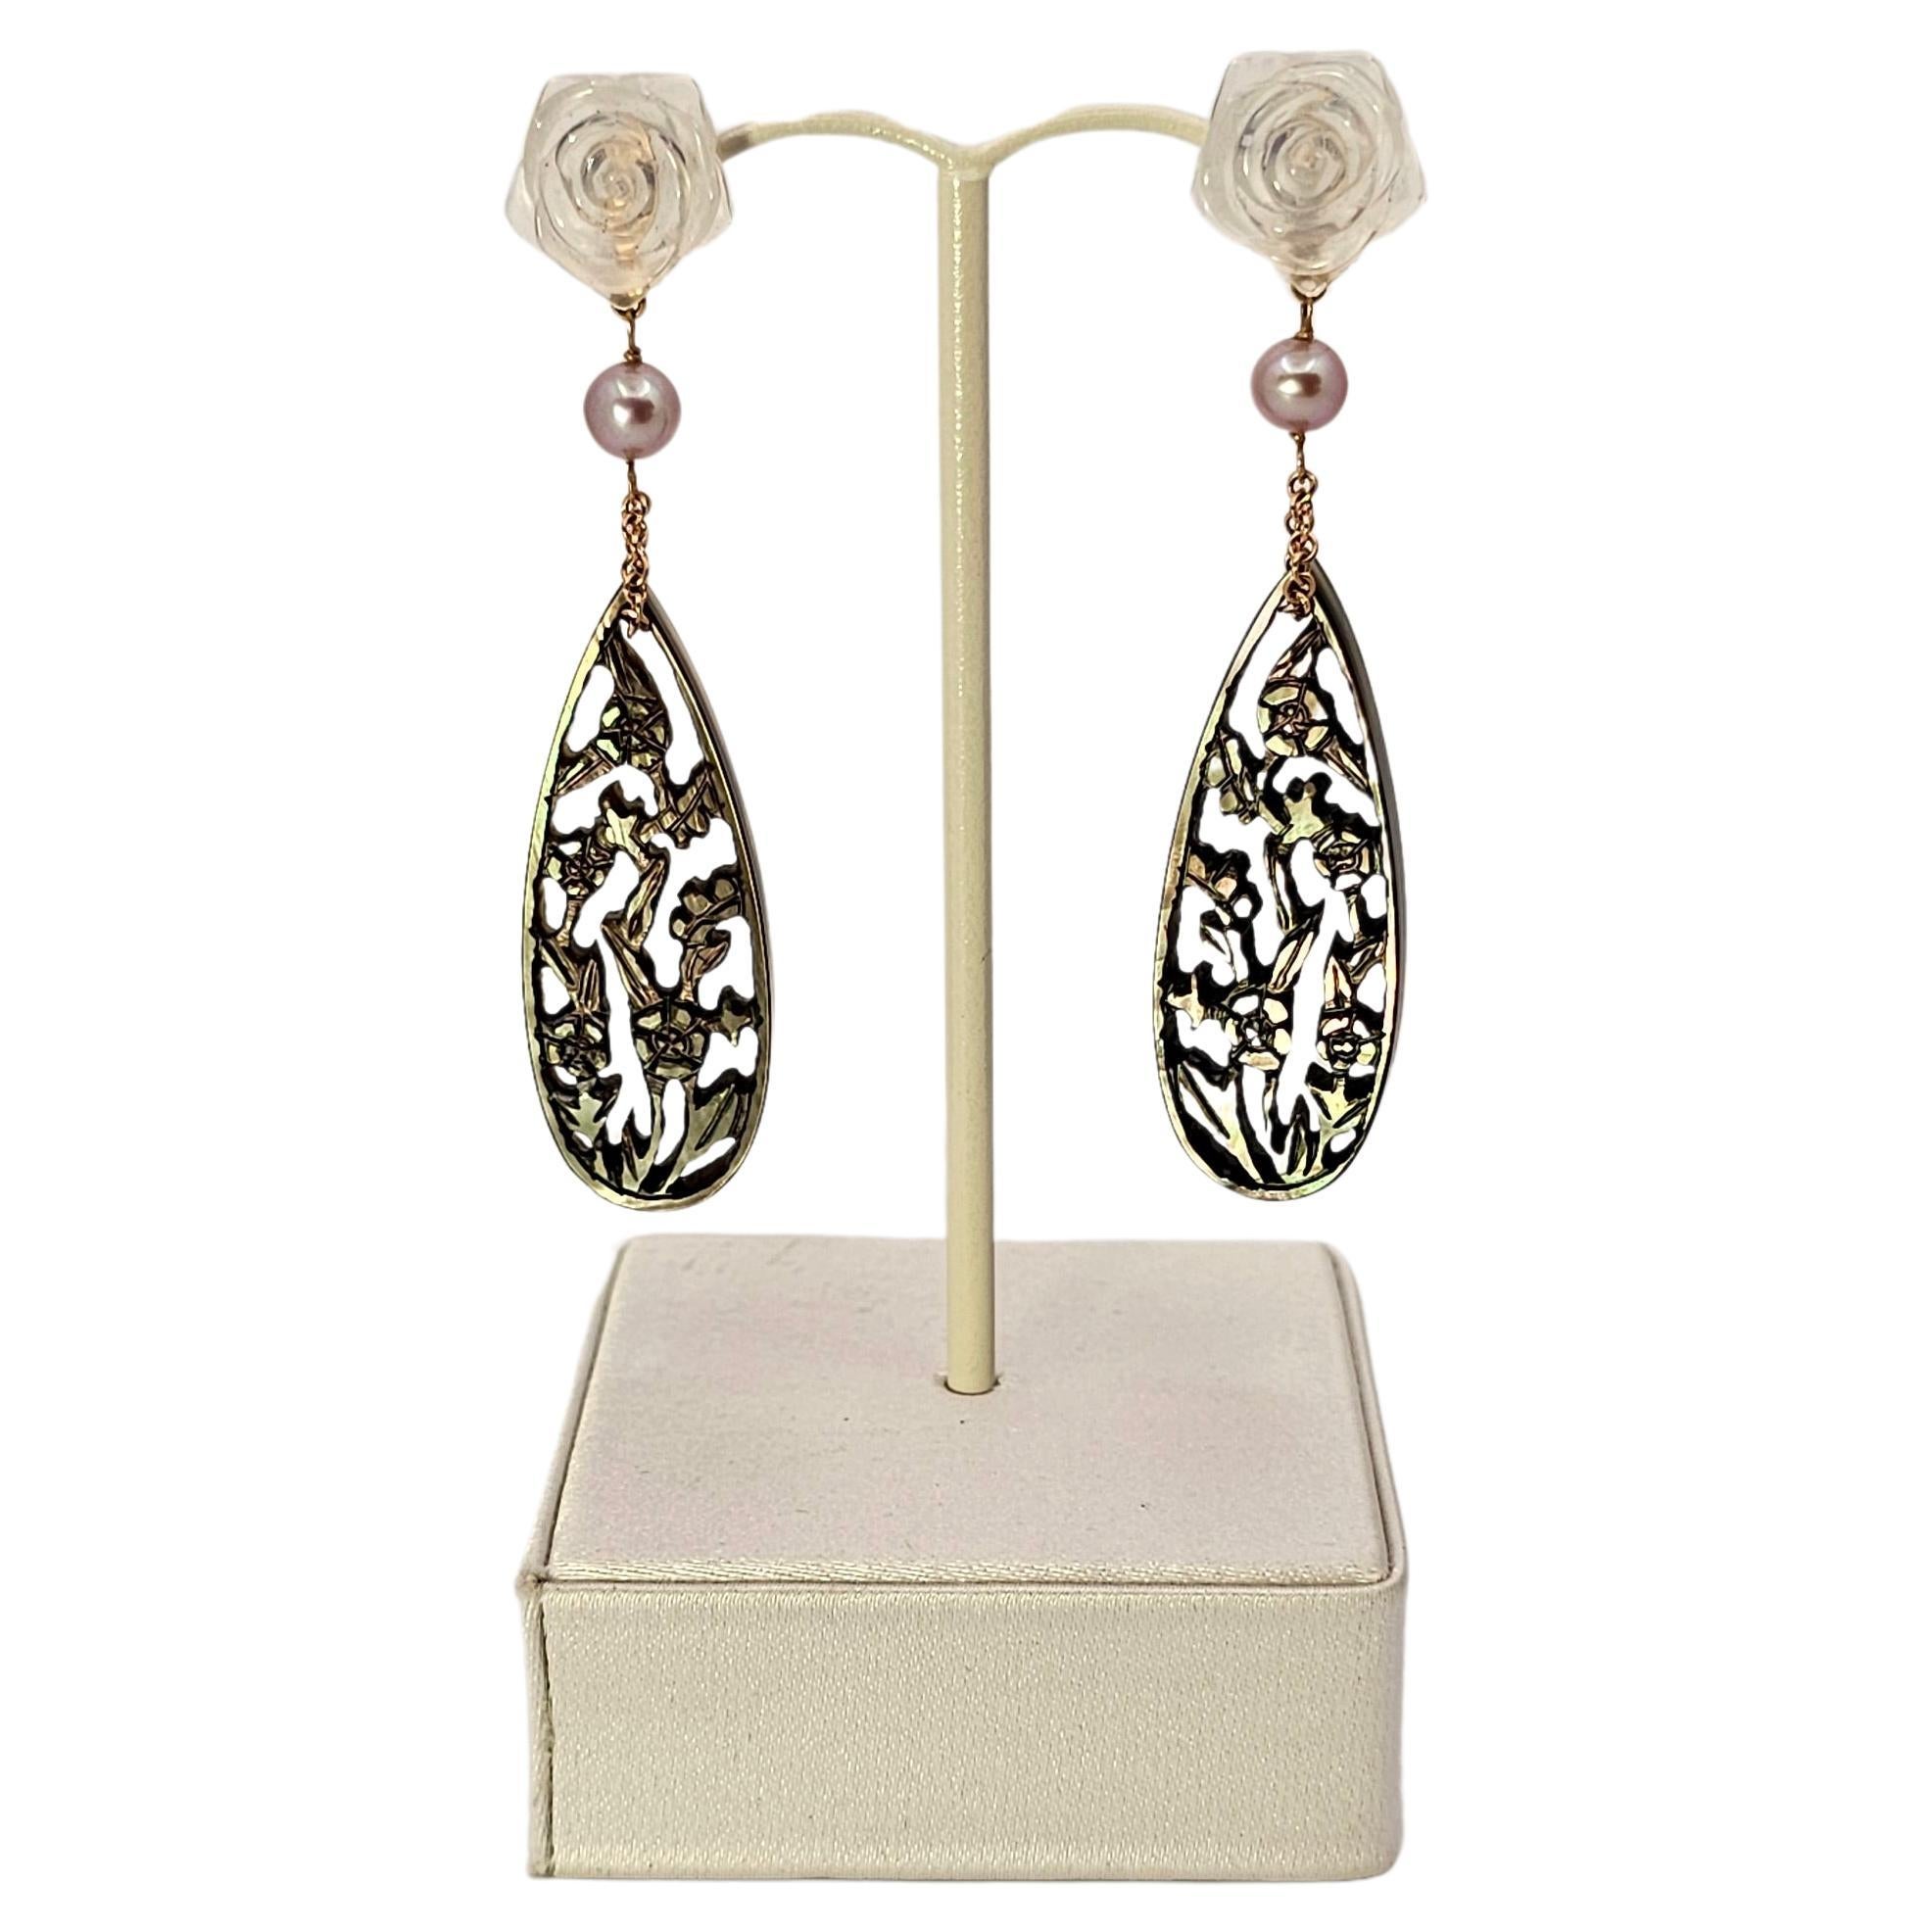 Dark Mother of Pearl, Quartz and Pearl Earrings in 18Kt Gold